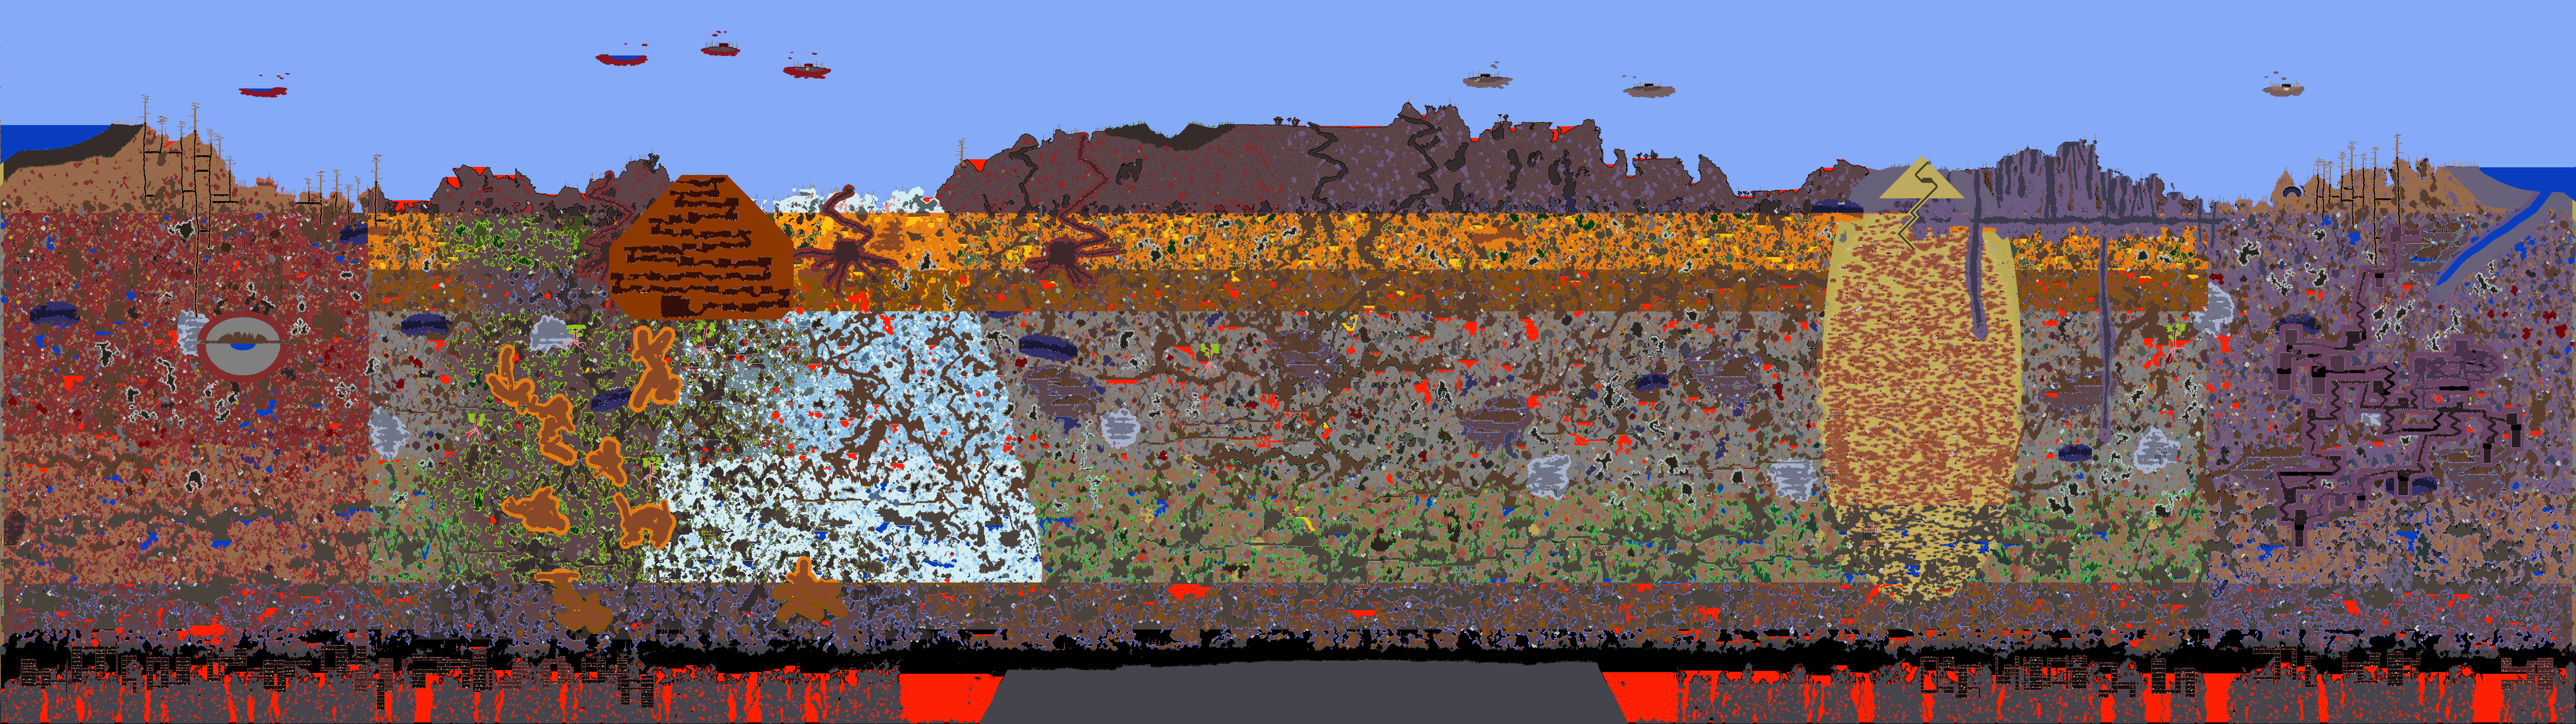 Terraria exe could not be found фото 44